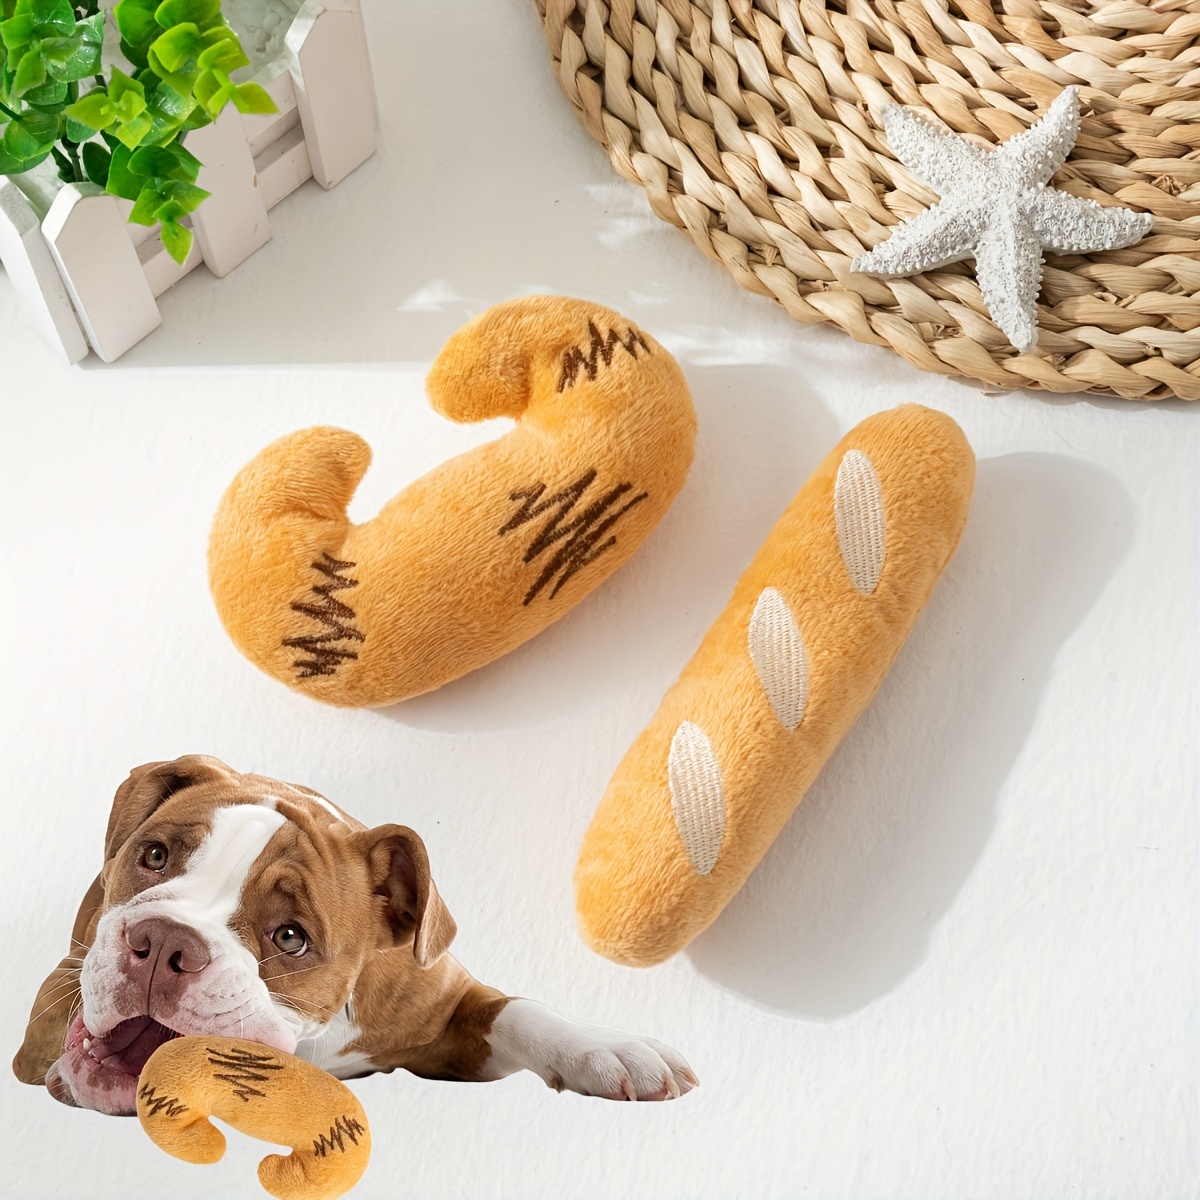 Cute Training Squeaky Plush Soft Croissant Bread Shaped Crinkly Chew Toy  Squeaker Bite Toys Sniffing Dog Toys CROISSANT BREAD 